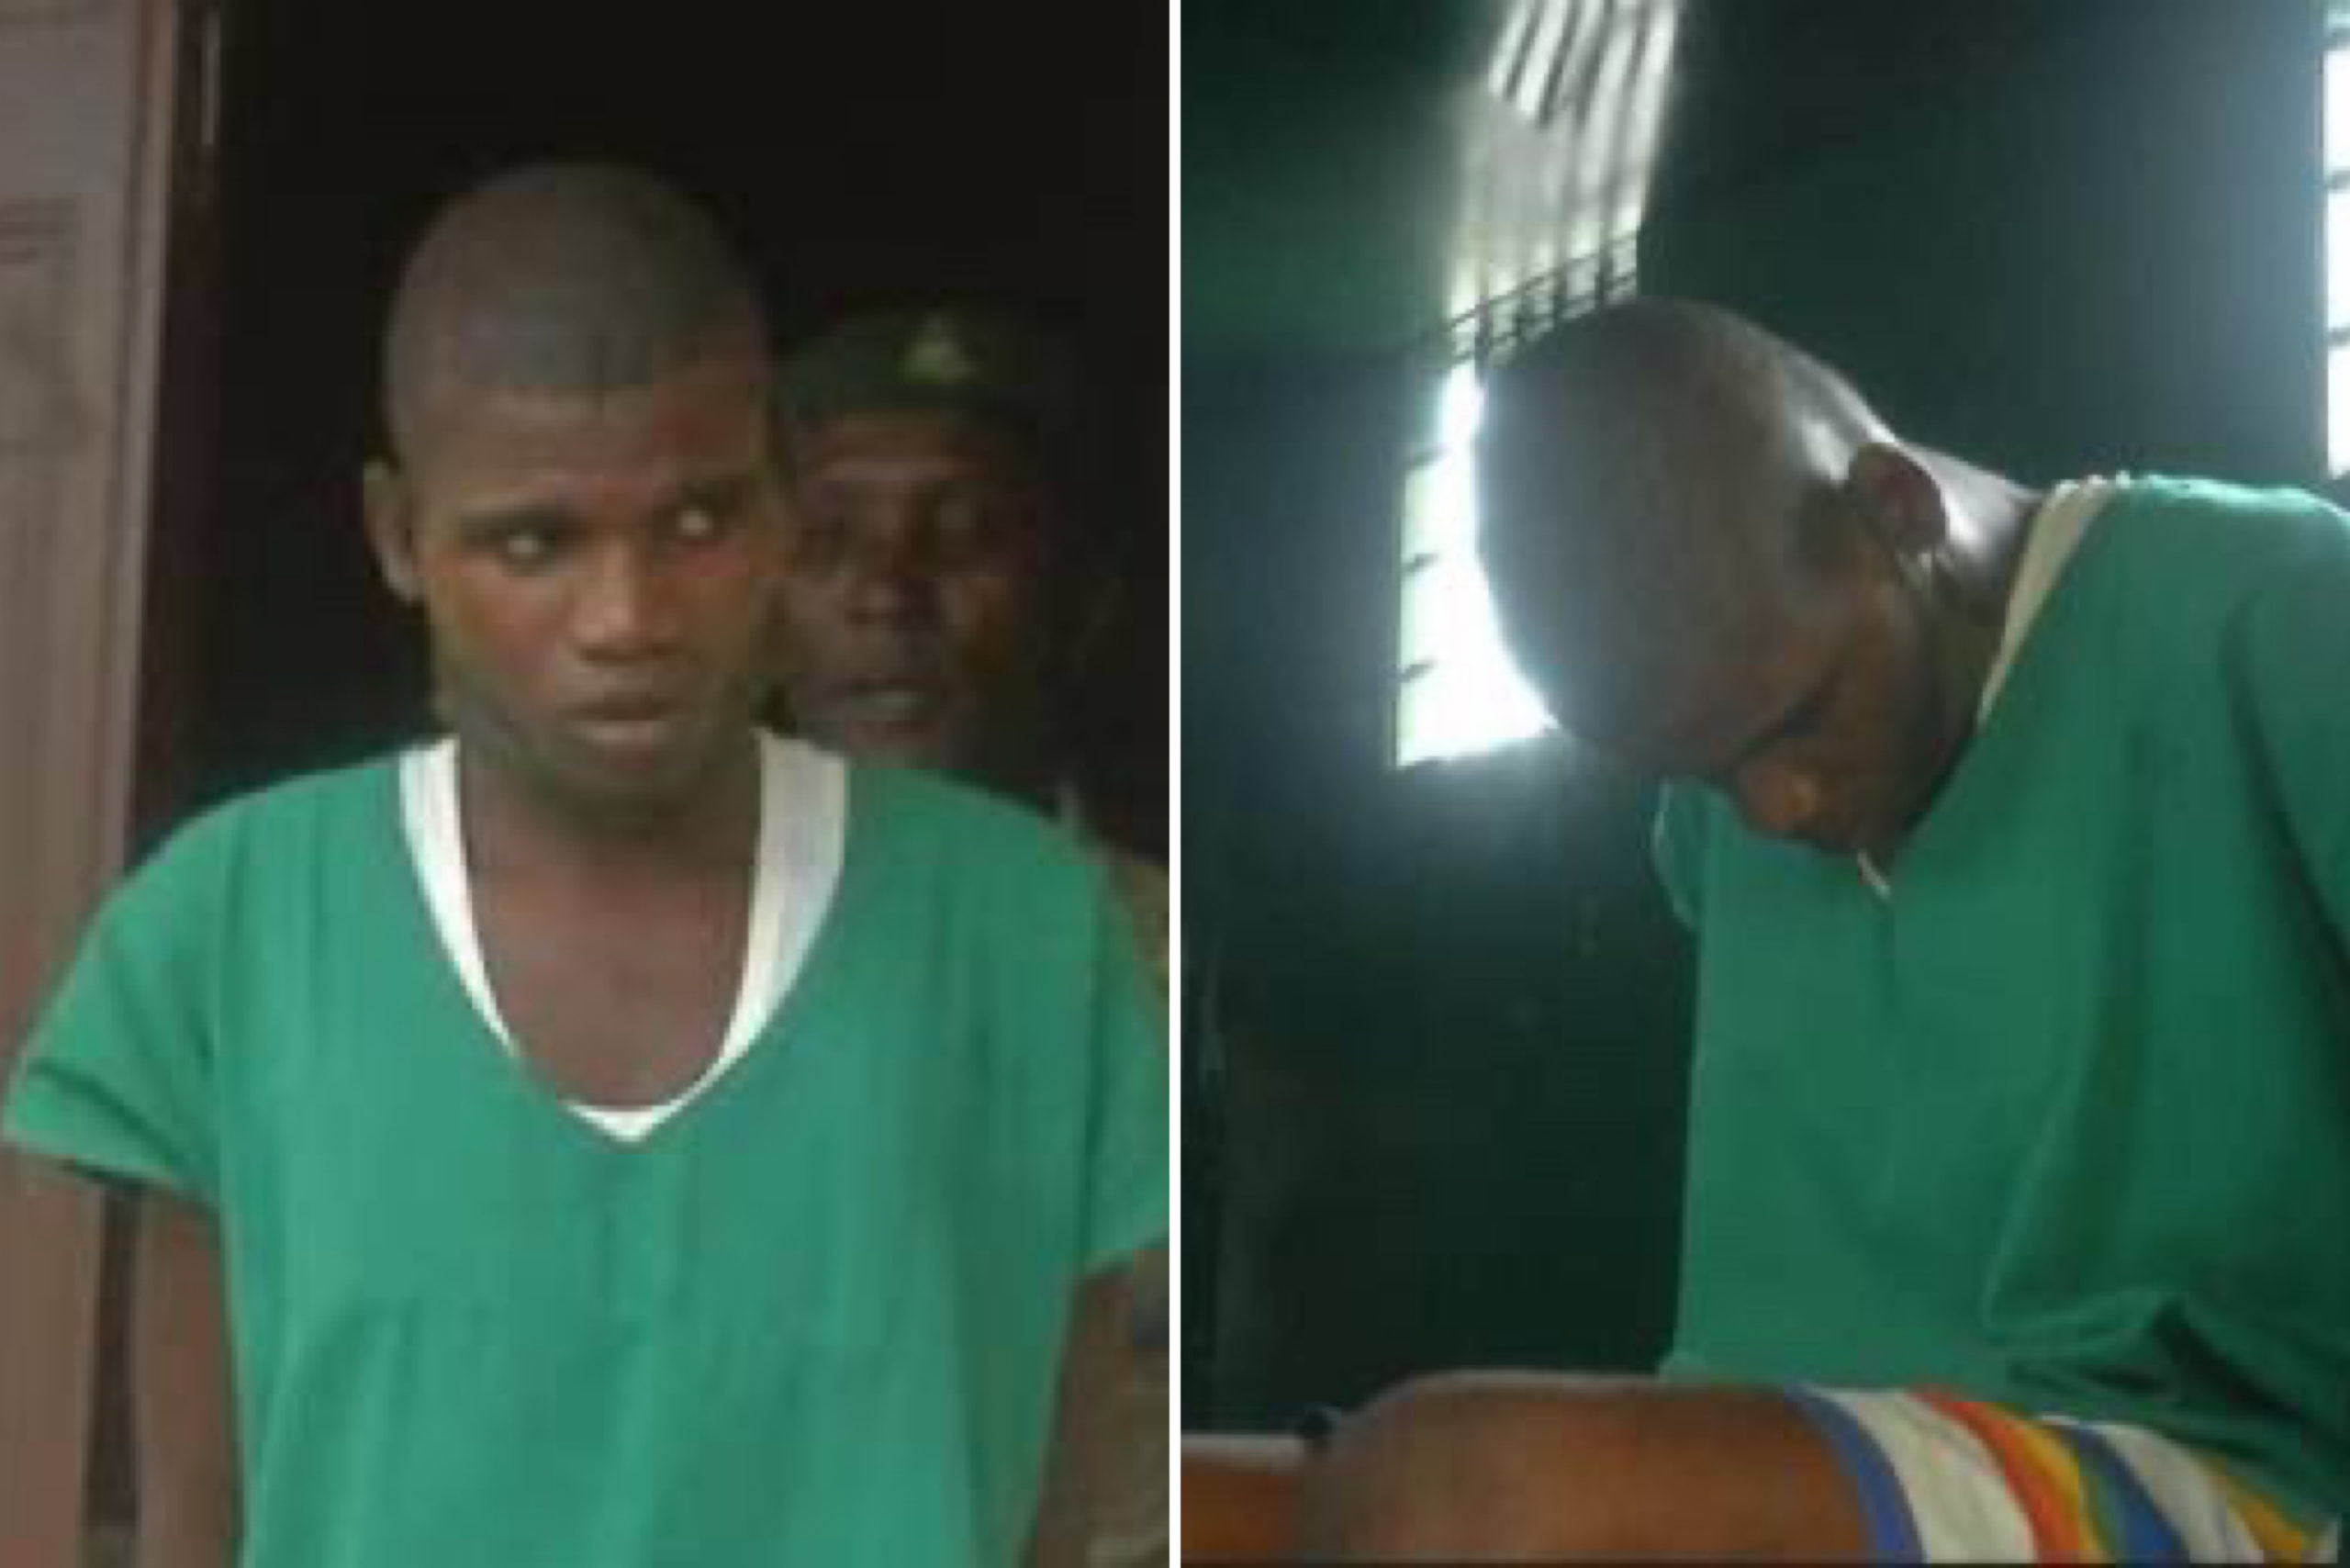 Man Sentenced To 10 Years Imprisonment For Raping 5-Year-Old Girl To Death In Bayelsa